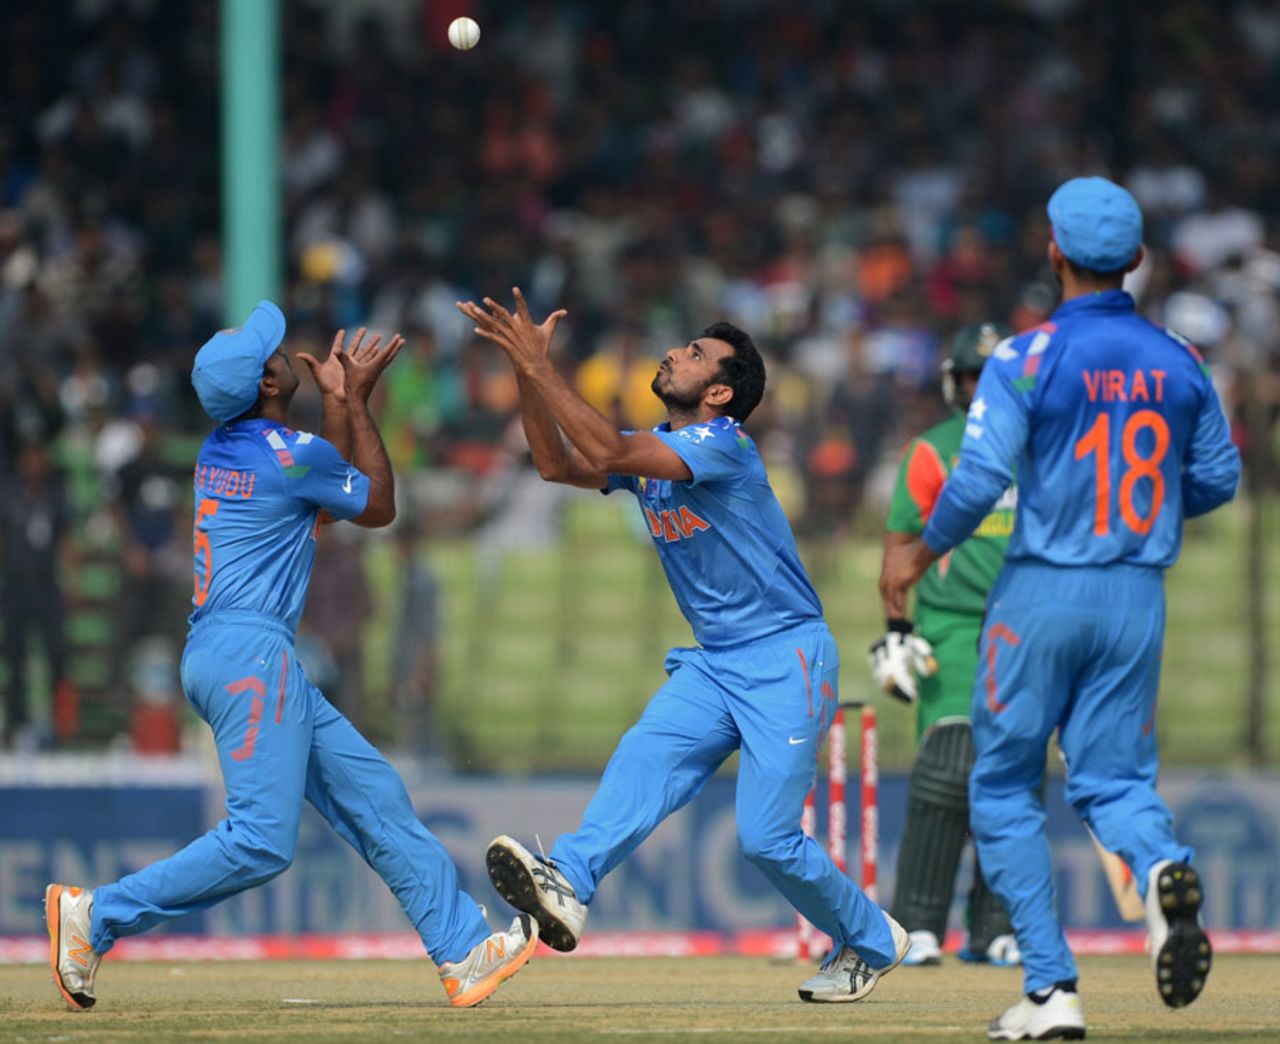 Mohammed Shami and Ambati Rayudu on collision course while attempting a catch, Bangladesh v India, Asia Cup 2014, Fatullah, February 26, 2014